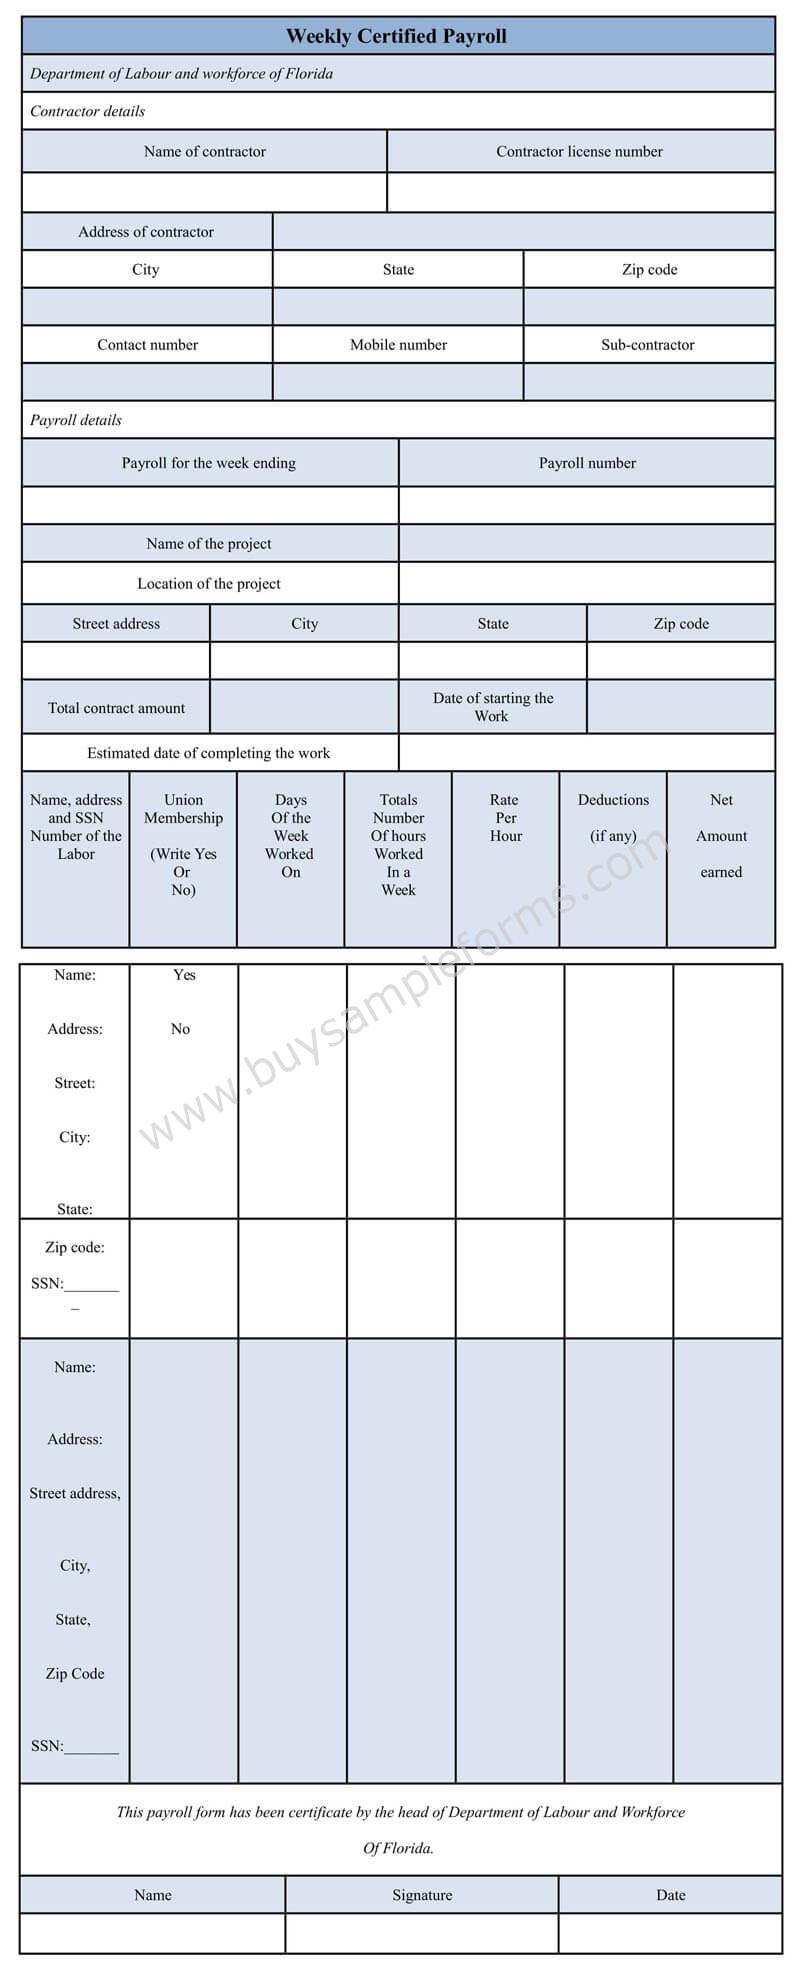 Weekly Certified Payroll Form Download Word Format, Payroll Form template